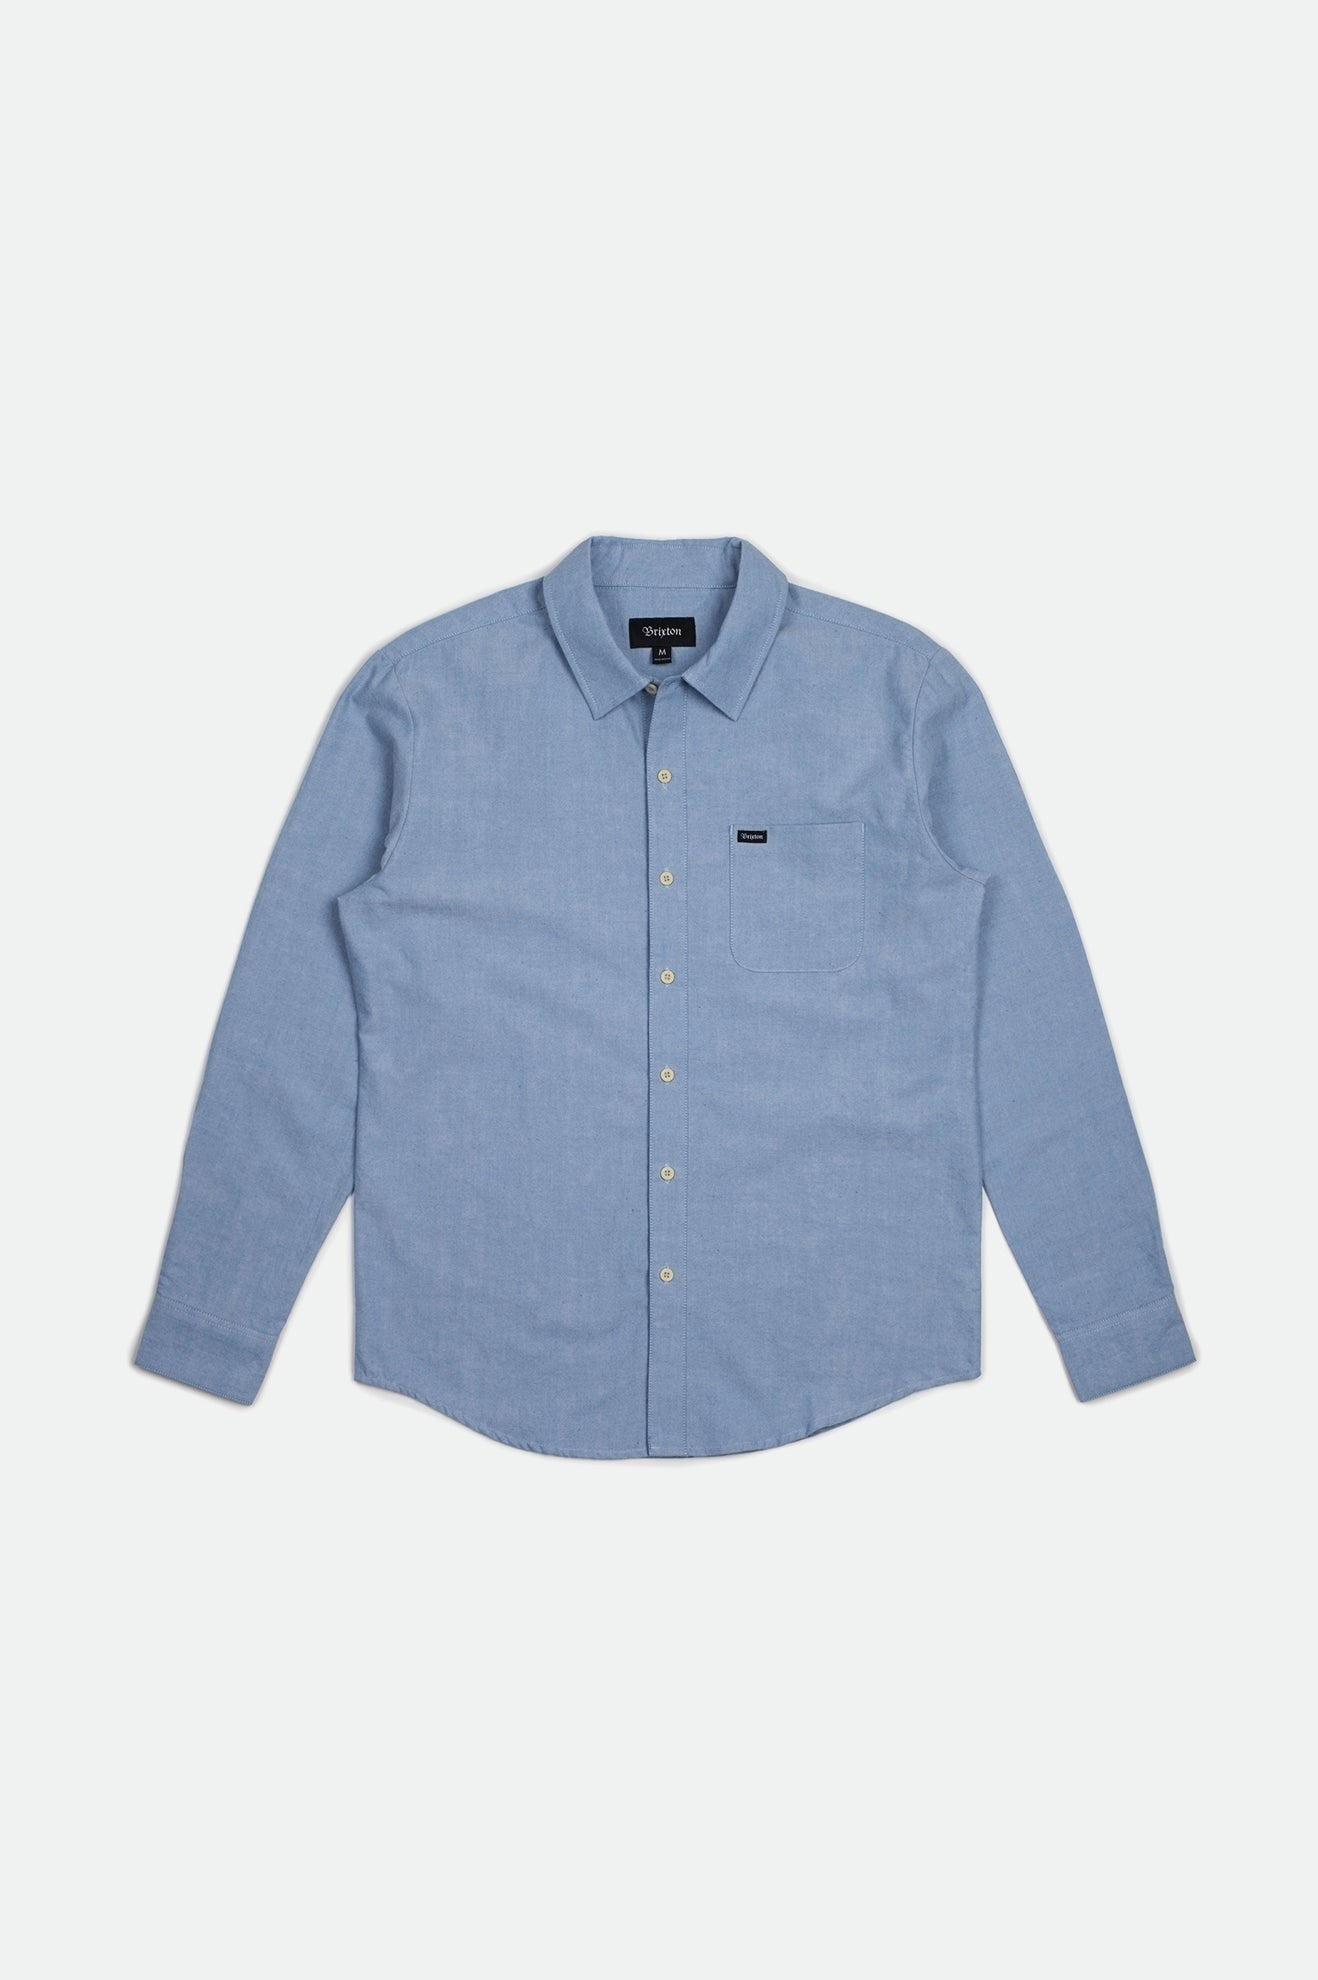 Charter Oxford L/S Woven - Light Blue Chambray